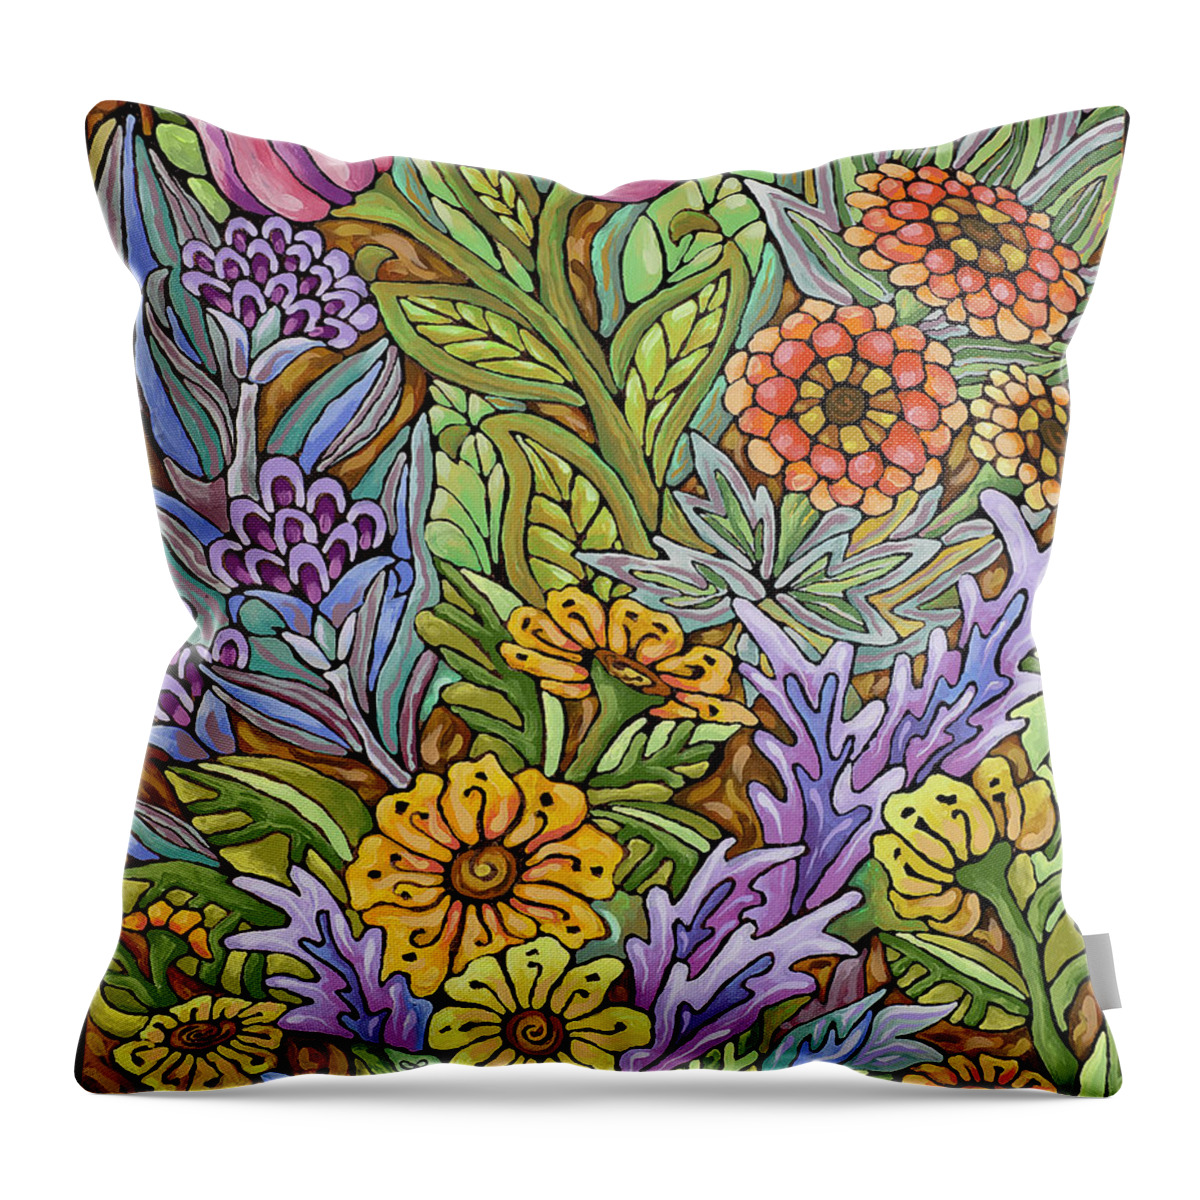  Throw Pillow featuring the painting Garden Blooms by Janice A Larson